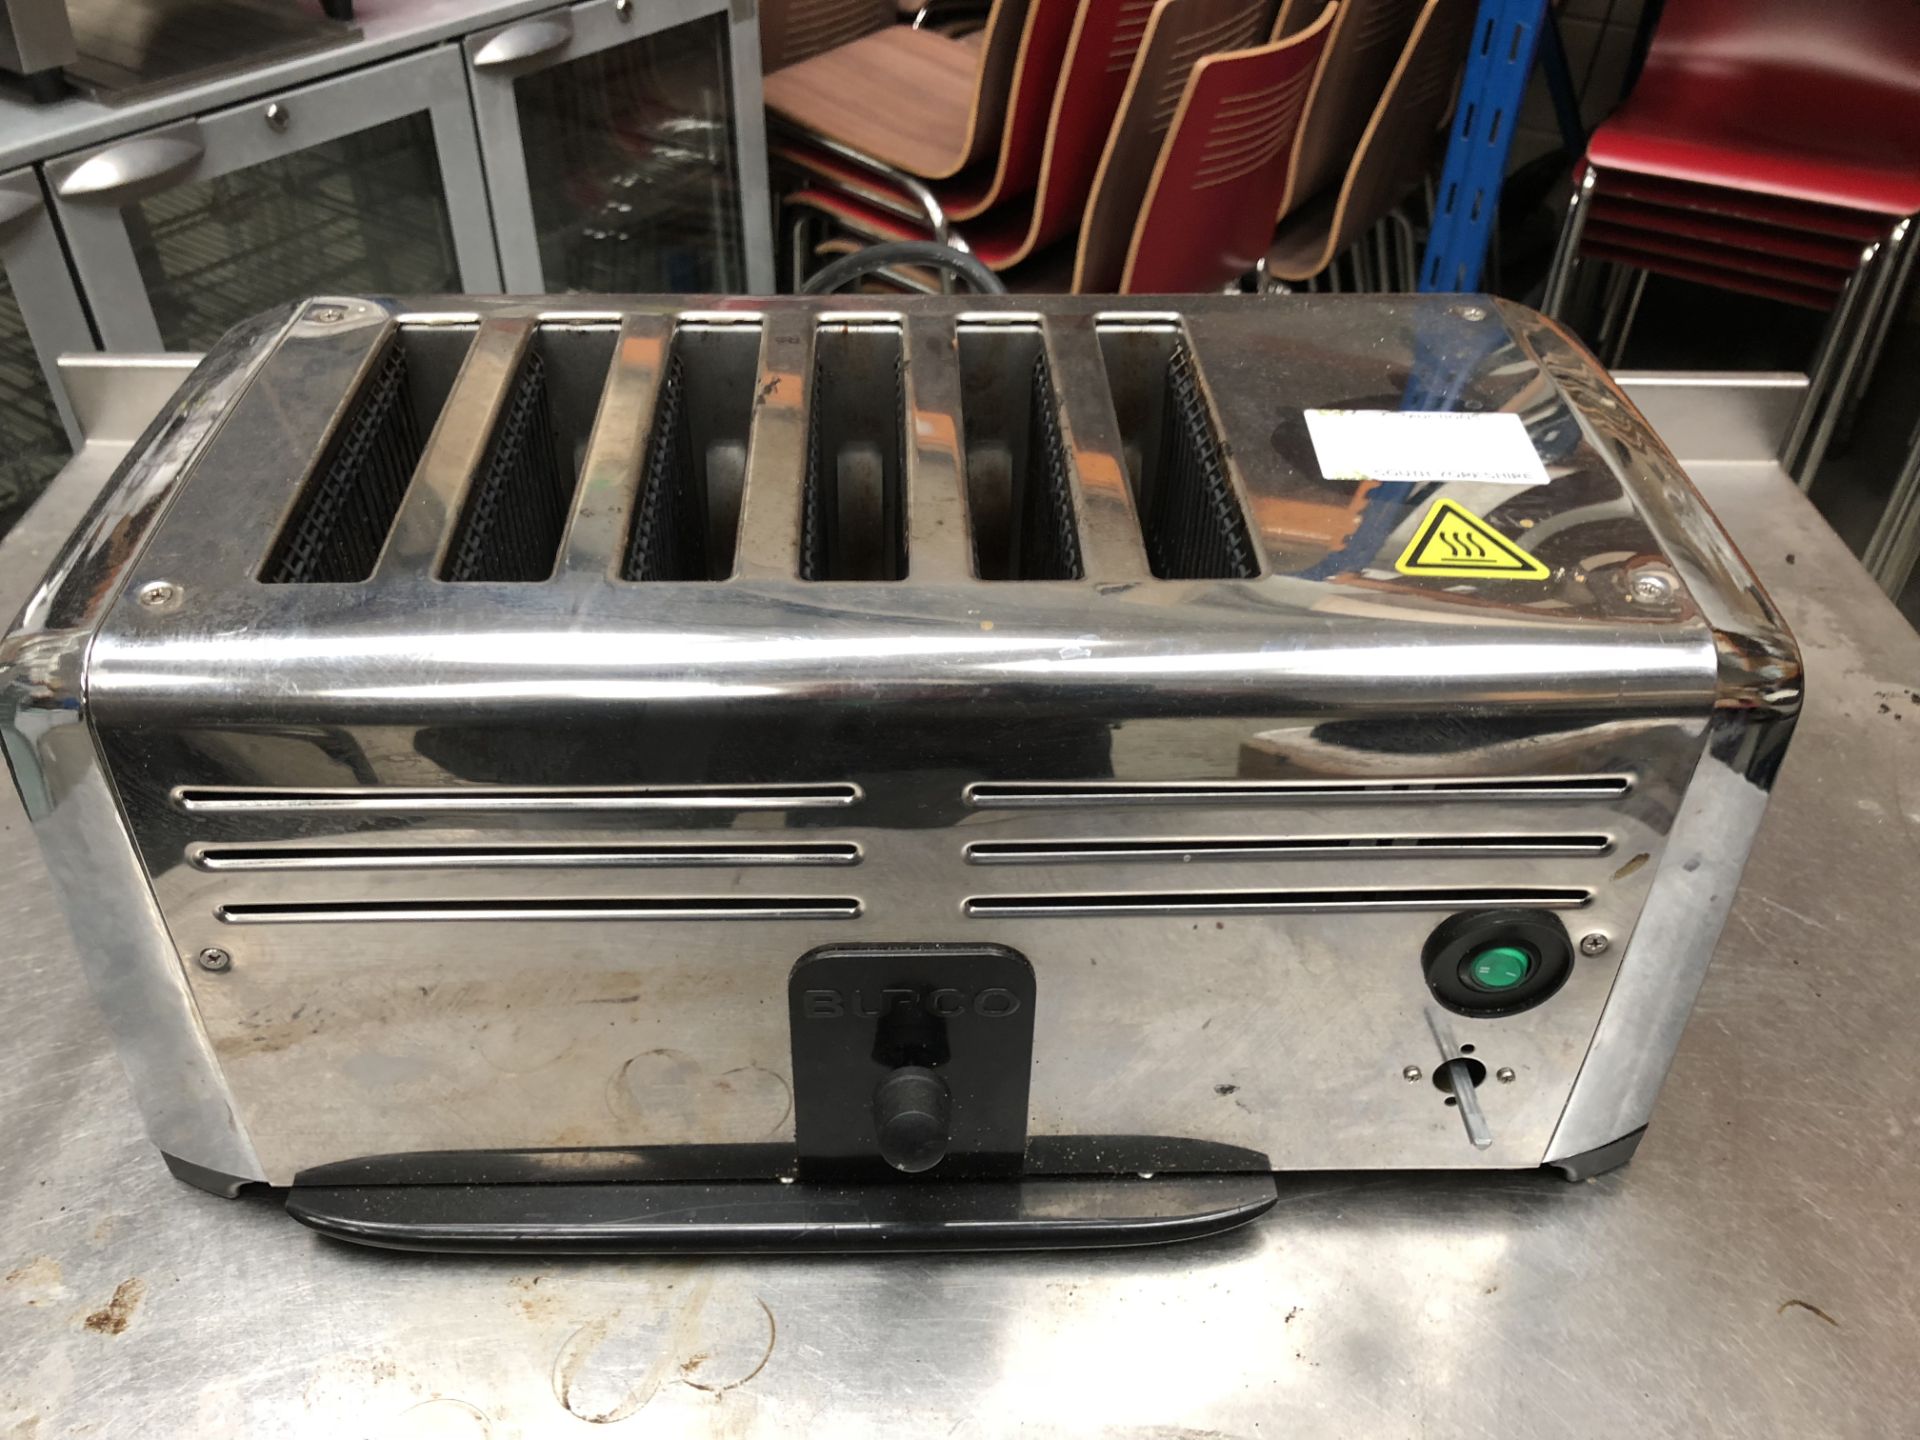 Burco Commercial 6 Slot Toaster